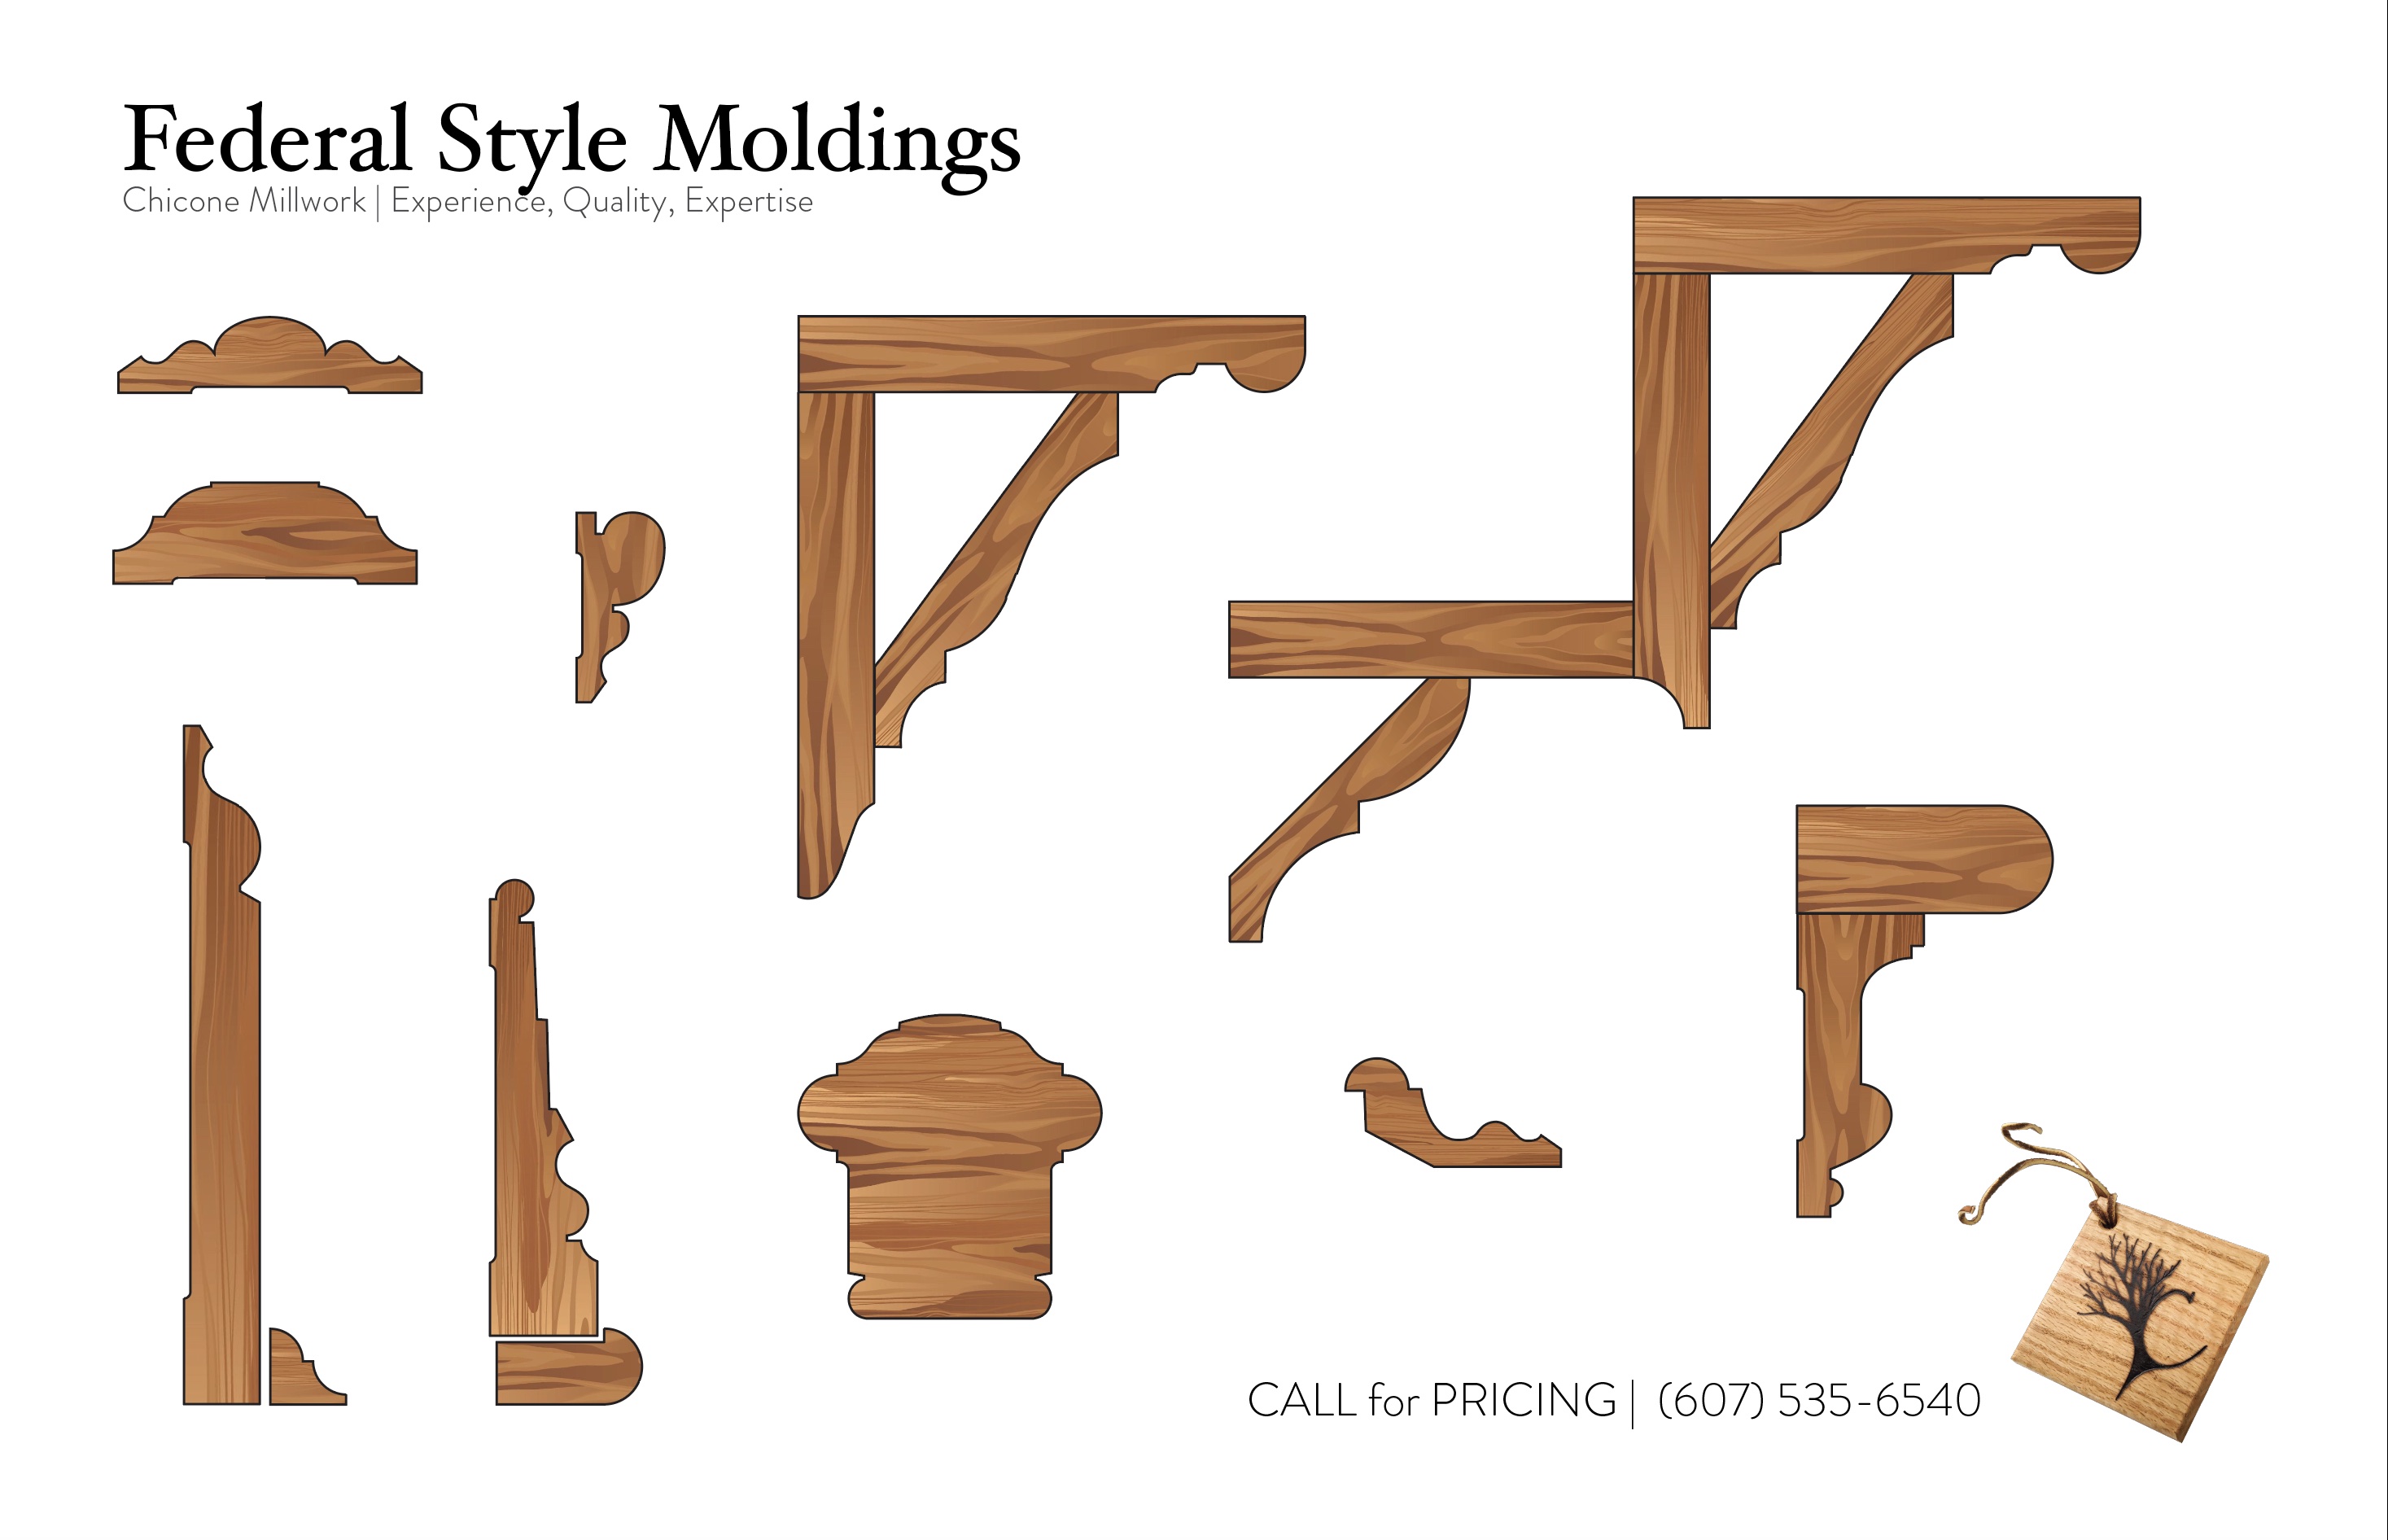 Federal Style Moldings